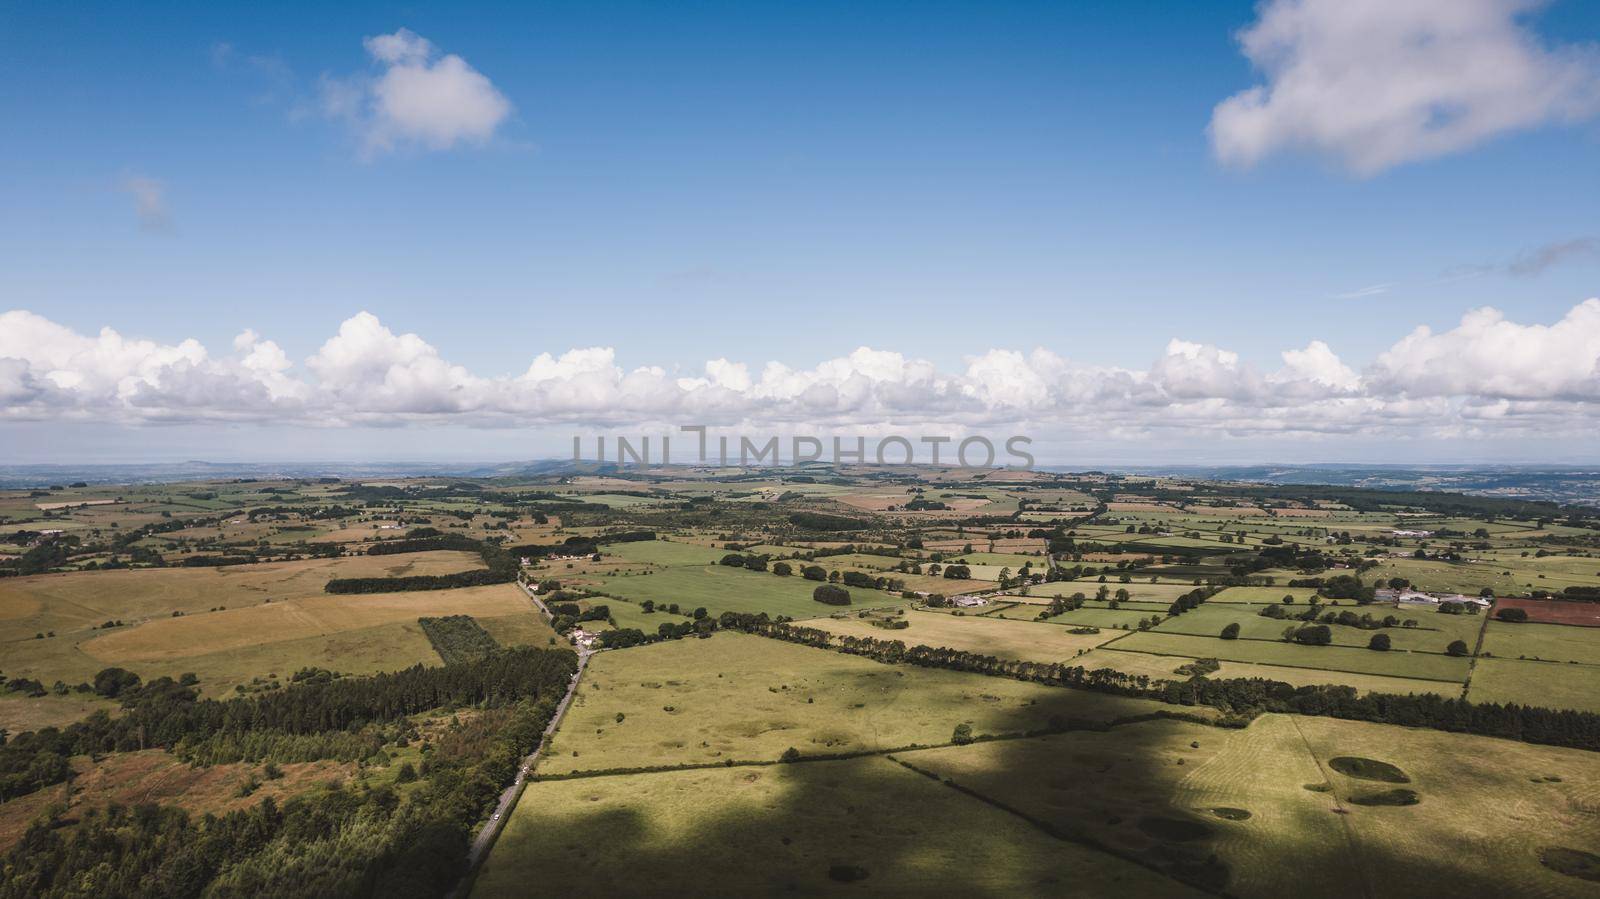 Countryside landscape from United Kingdom by fabioxavierphotography